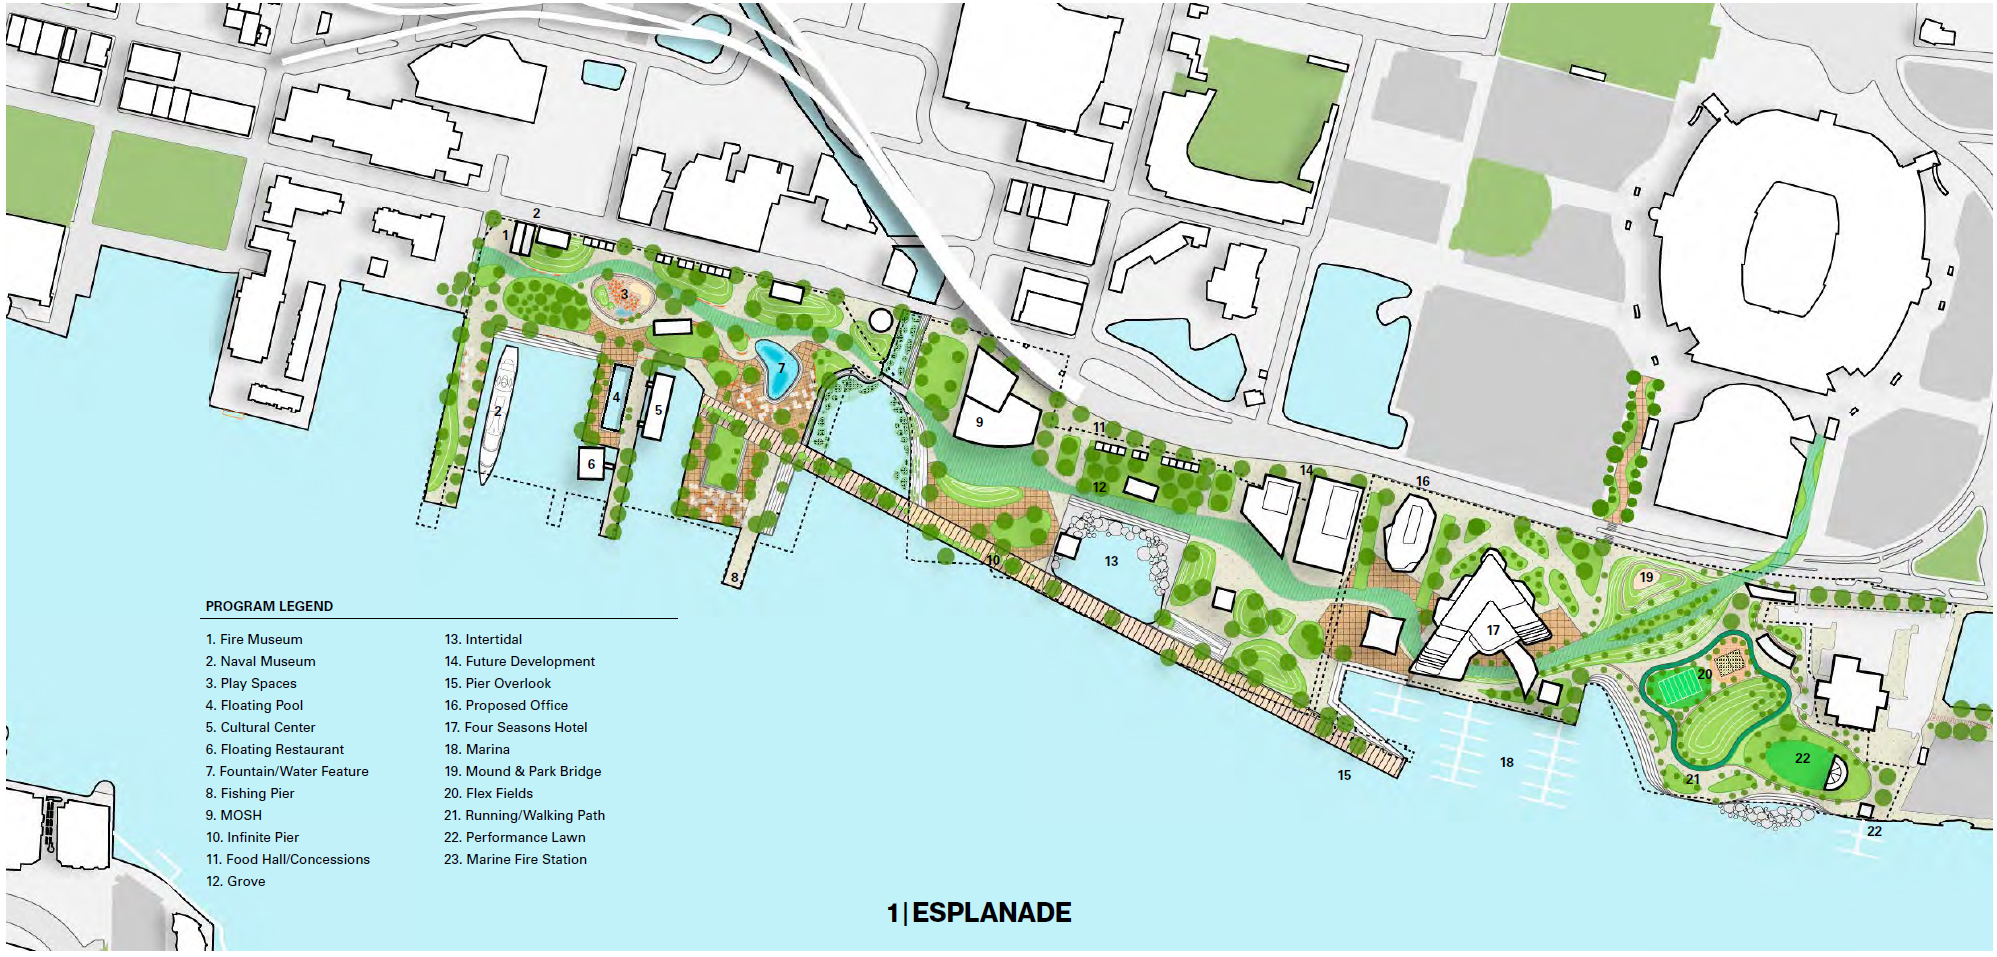 Here is the Jesse Ball duPont Fund’s Esplanade plan for the Downtown Shipyards from the former Berkman Plaza II site to Metropolitian Park nearTIAA Bank Field.